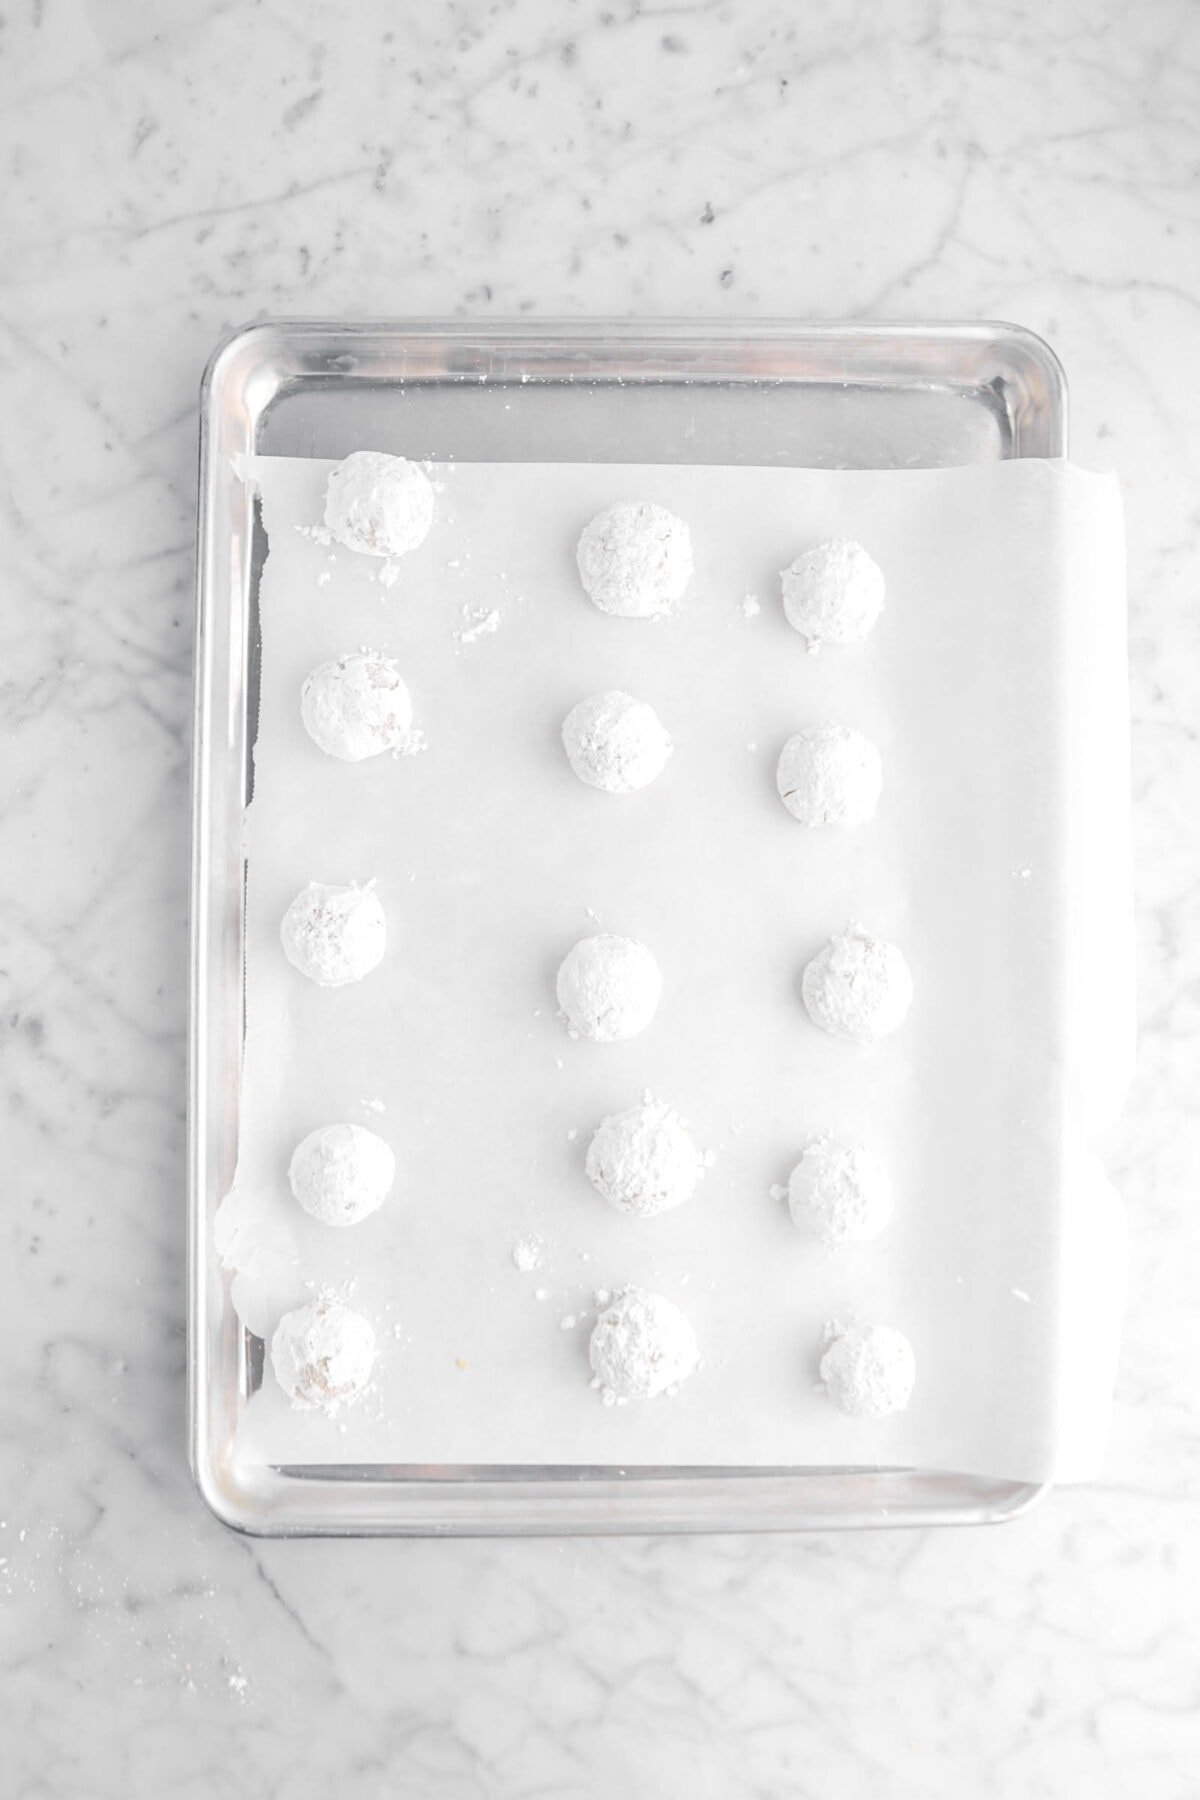 powdered sugar coated cookie dough balls on lined sheet pan